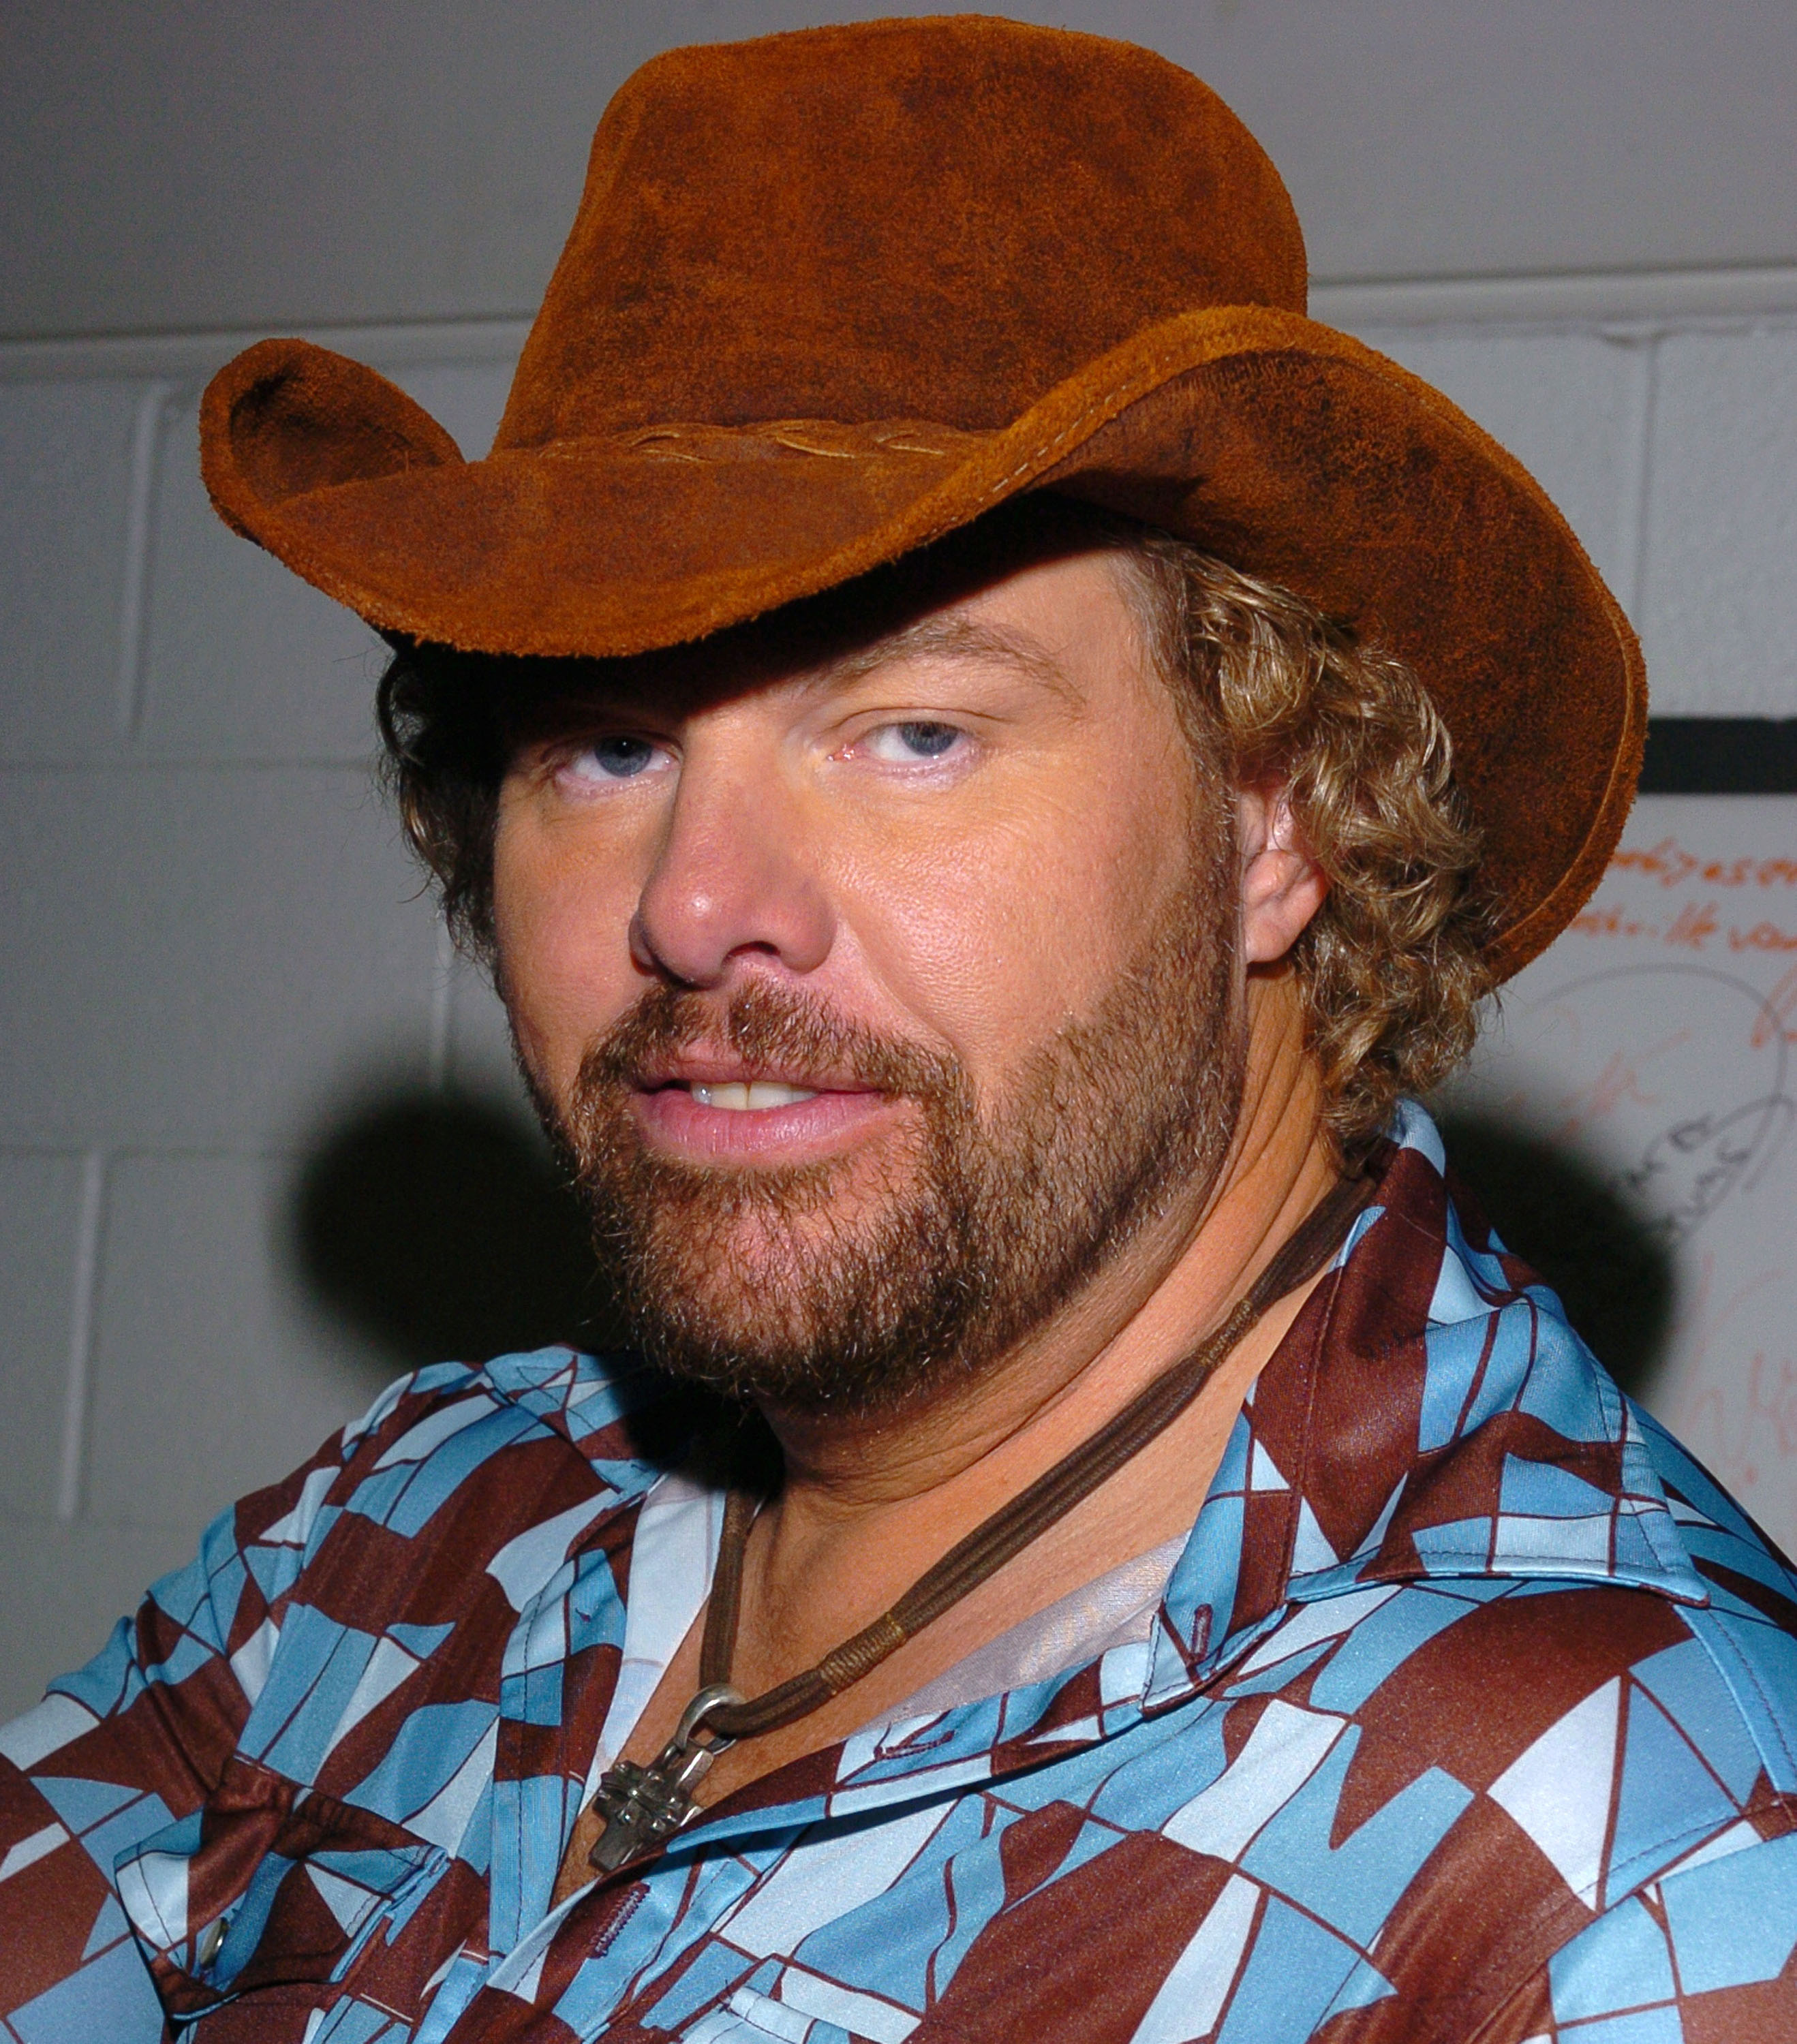 Toby Keith attends 2005 CMT Music Awards in Nashville, Tennessee | Source: Getty Images